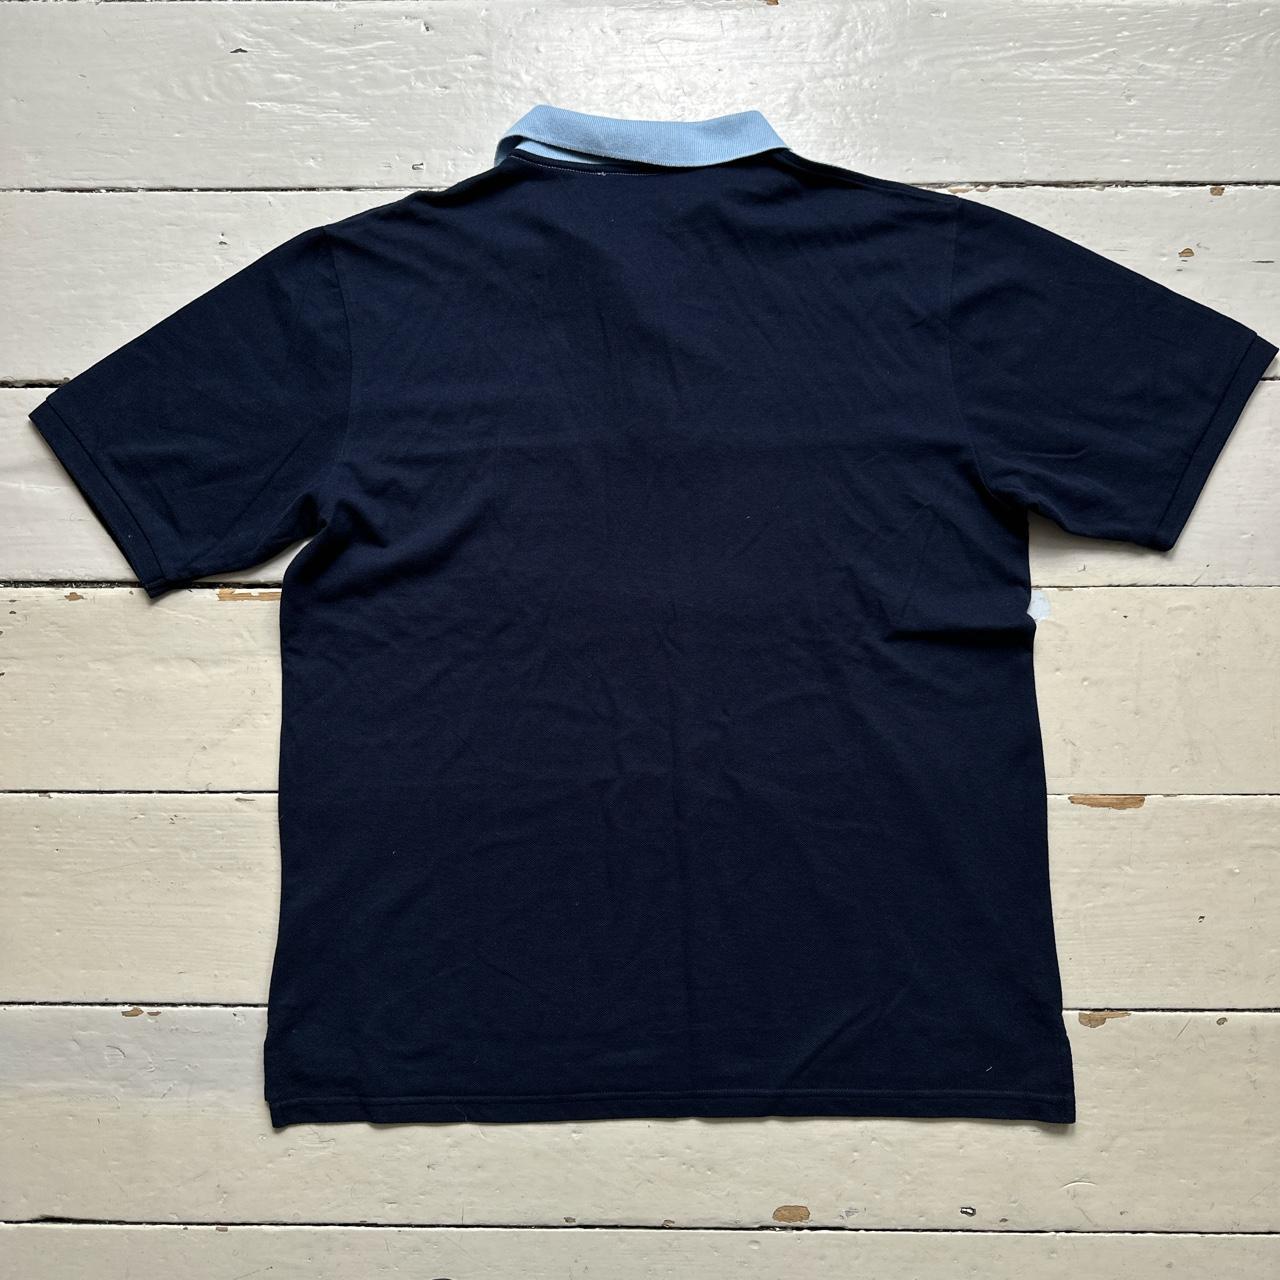 Yves Saint Laurent Vintage Navy and Baby Blue Polo Shirt